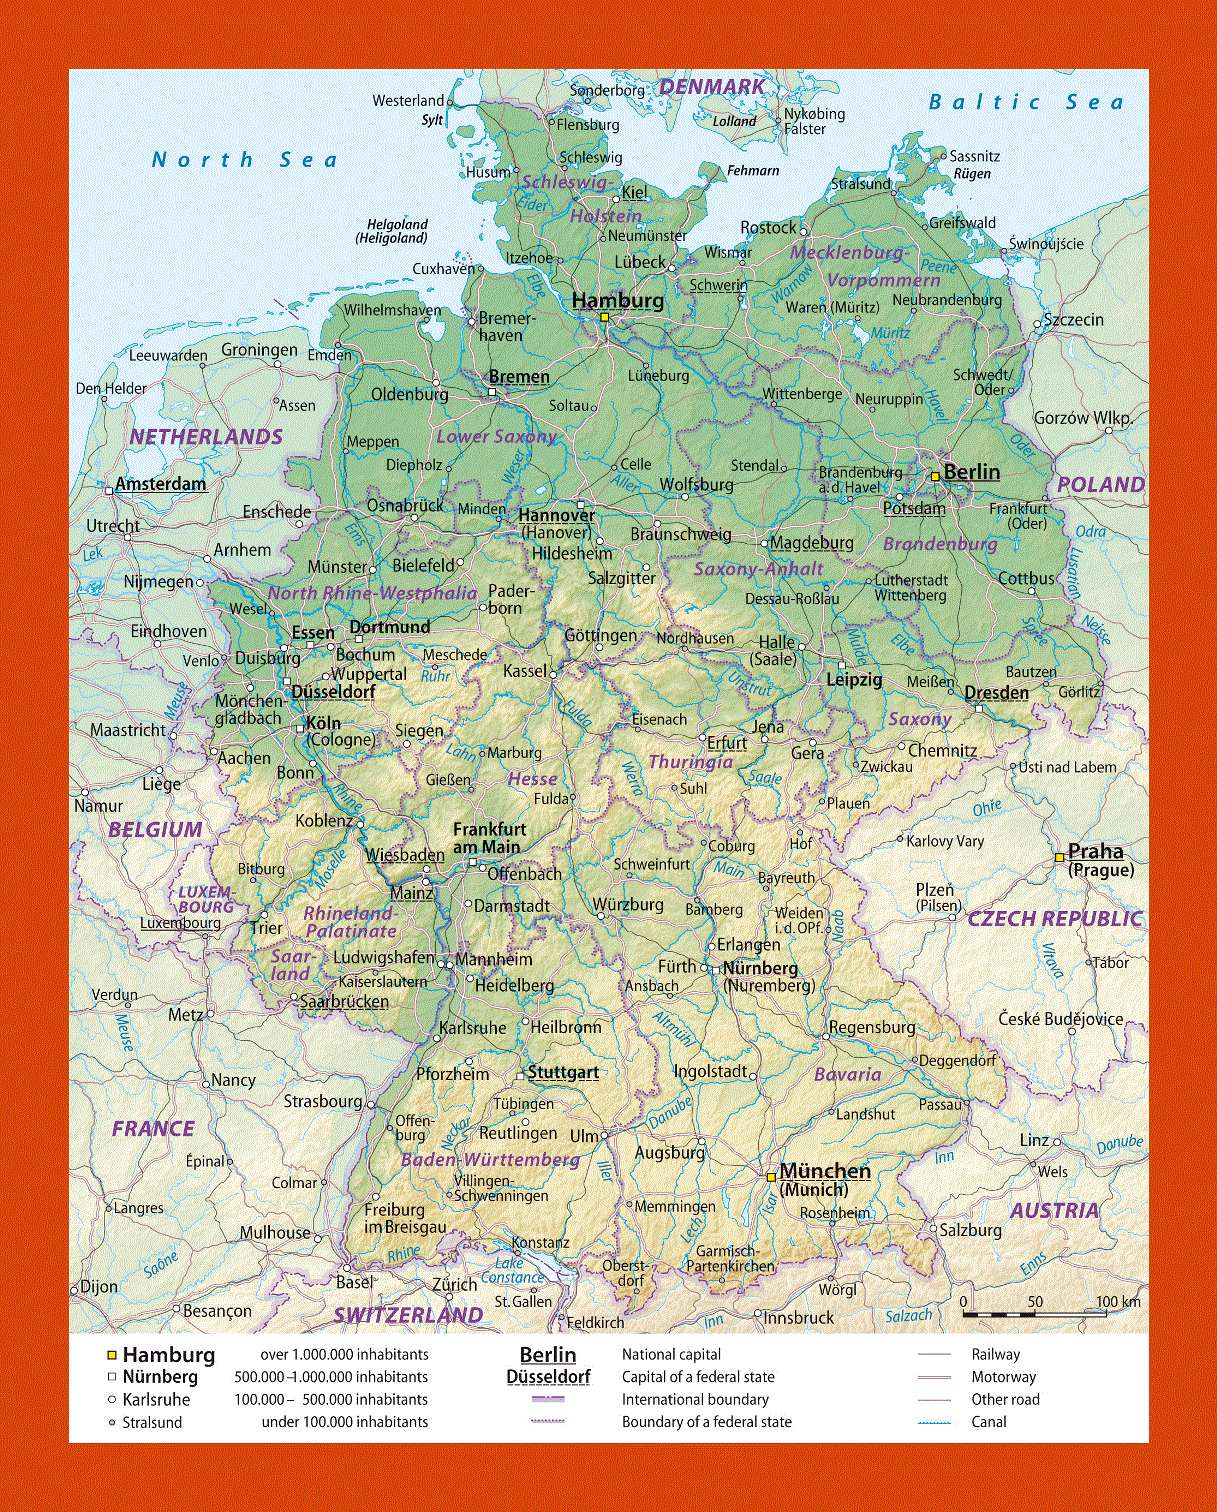 Elevation map of Germany